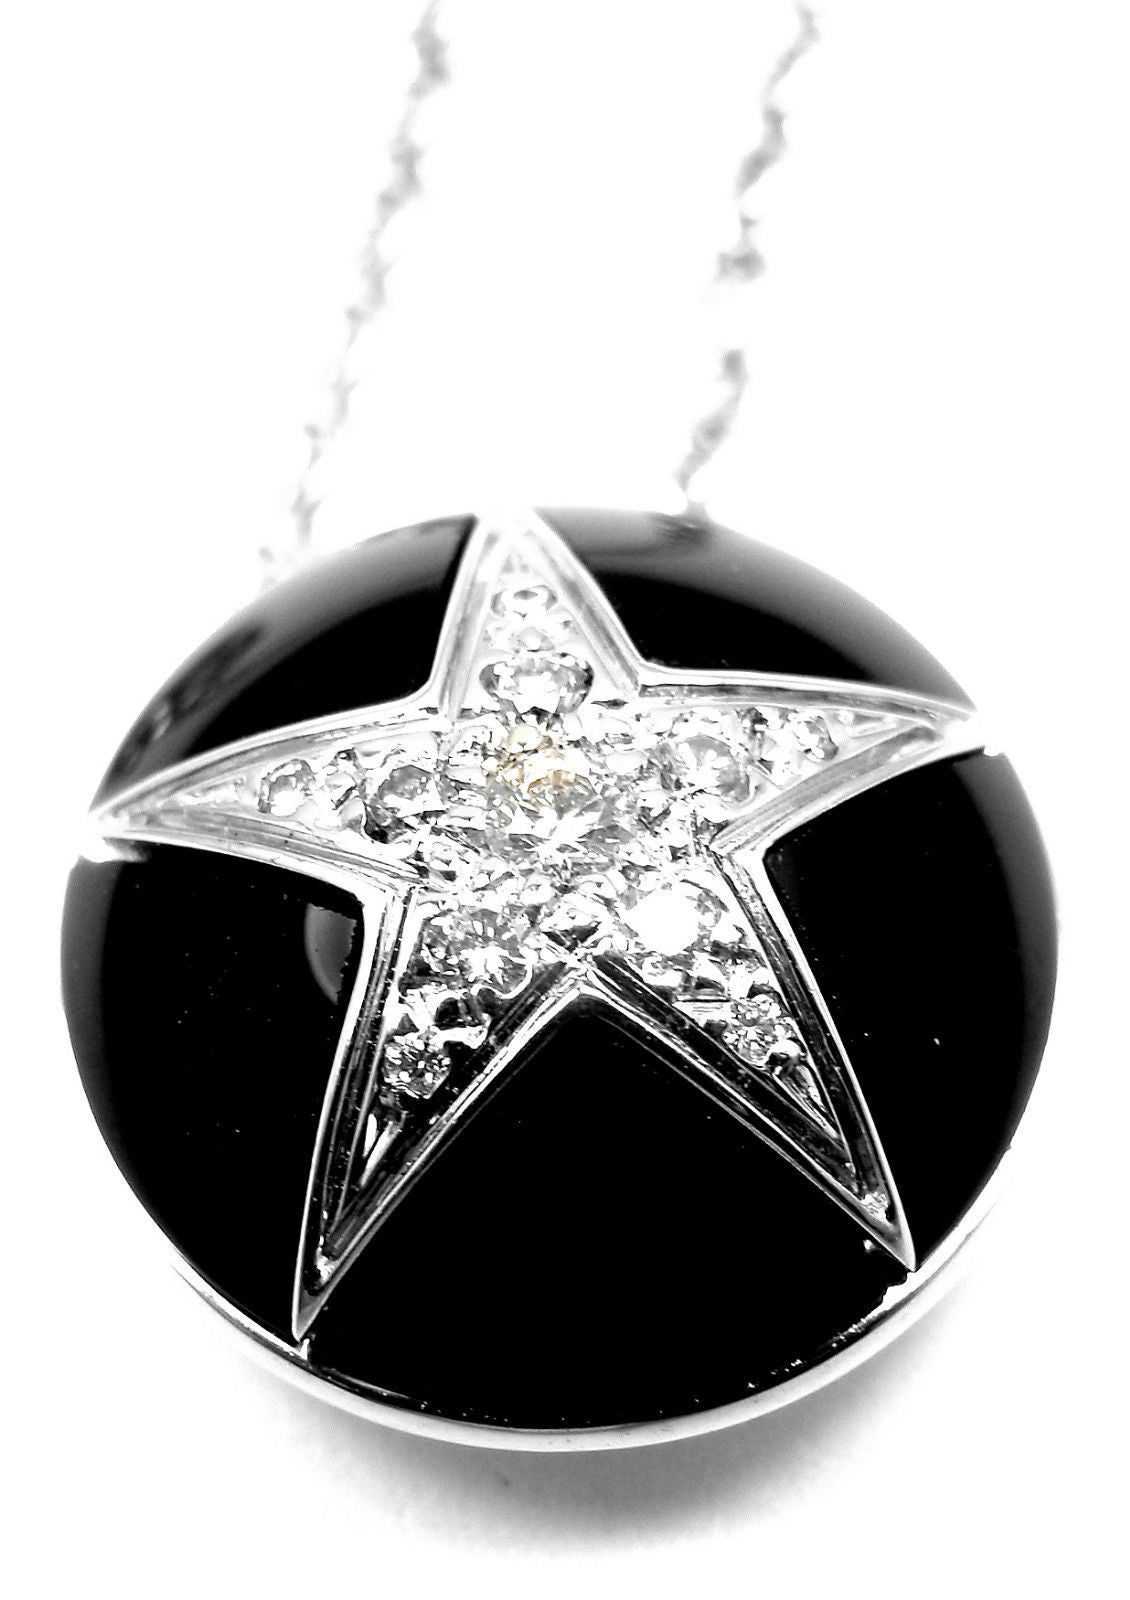 18k White Gold Diamond & Black Agate Comete Star Pendant Necklace by Chanel.
With 11 x Diamond, Totaling Approx. .10ct
VVS1 Clarity F color

Details:
Length: Length: 16